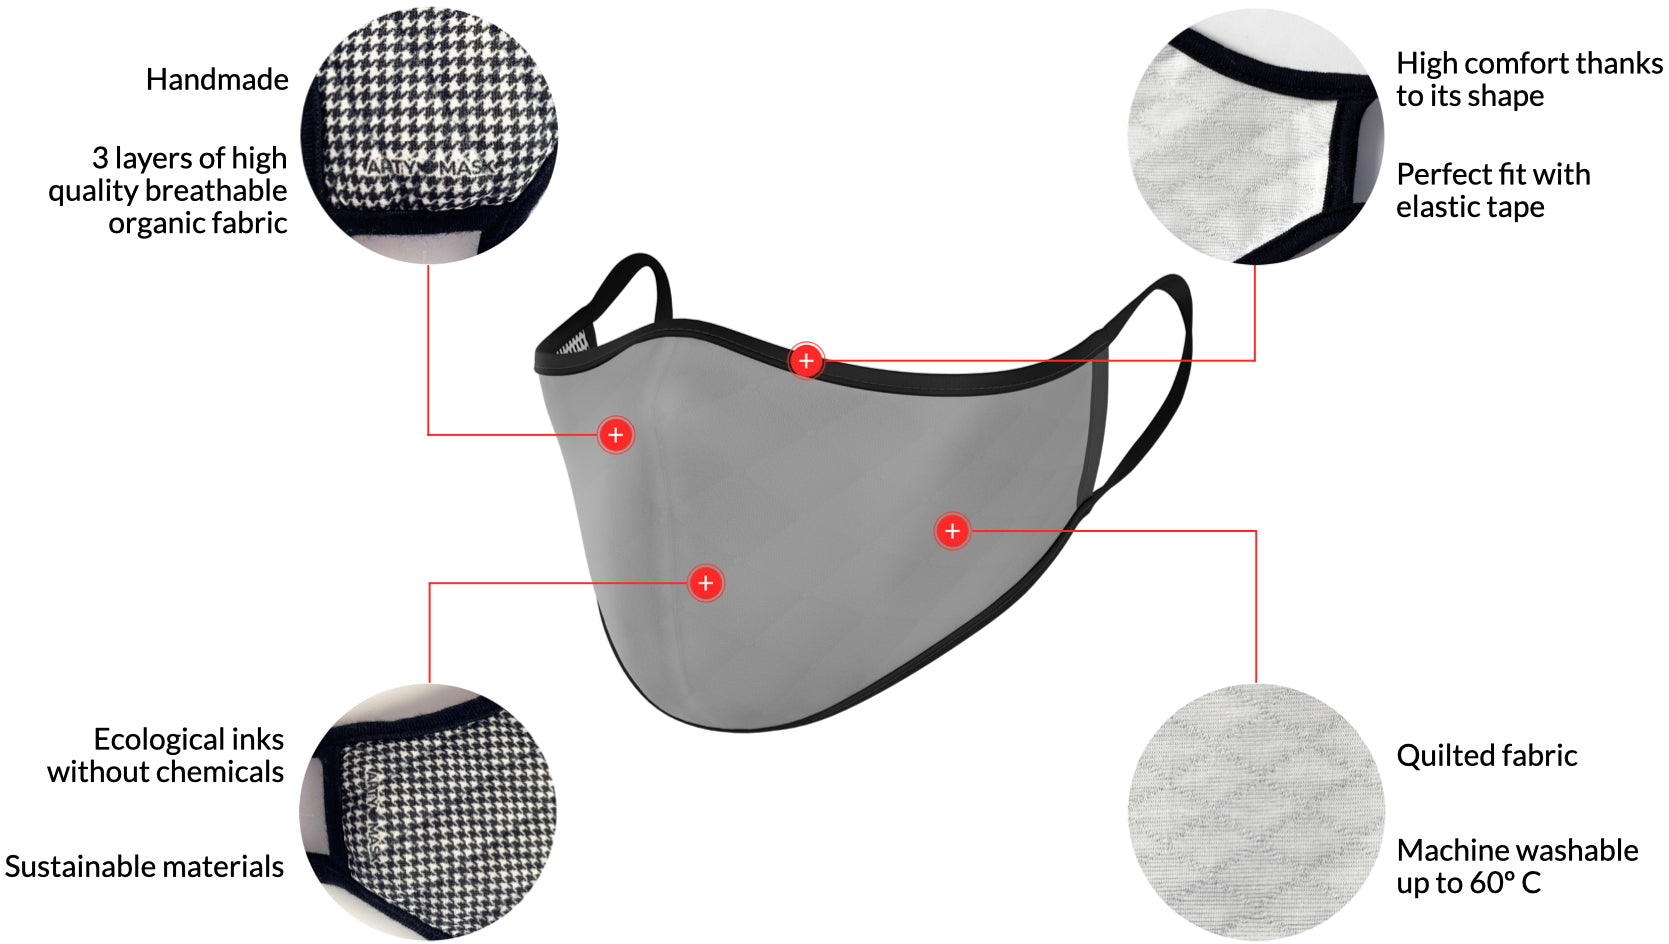 ArtyMask reusable Face Mask features